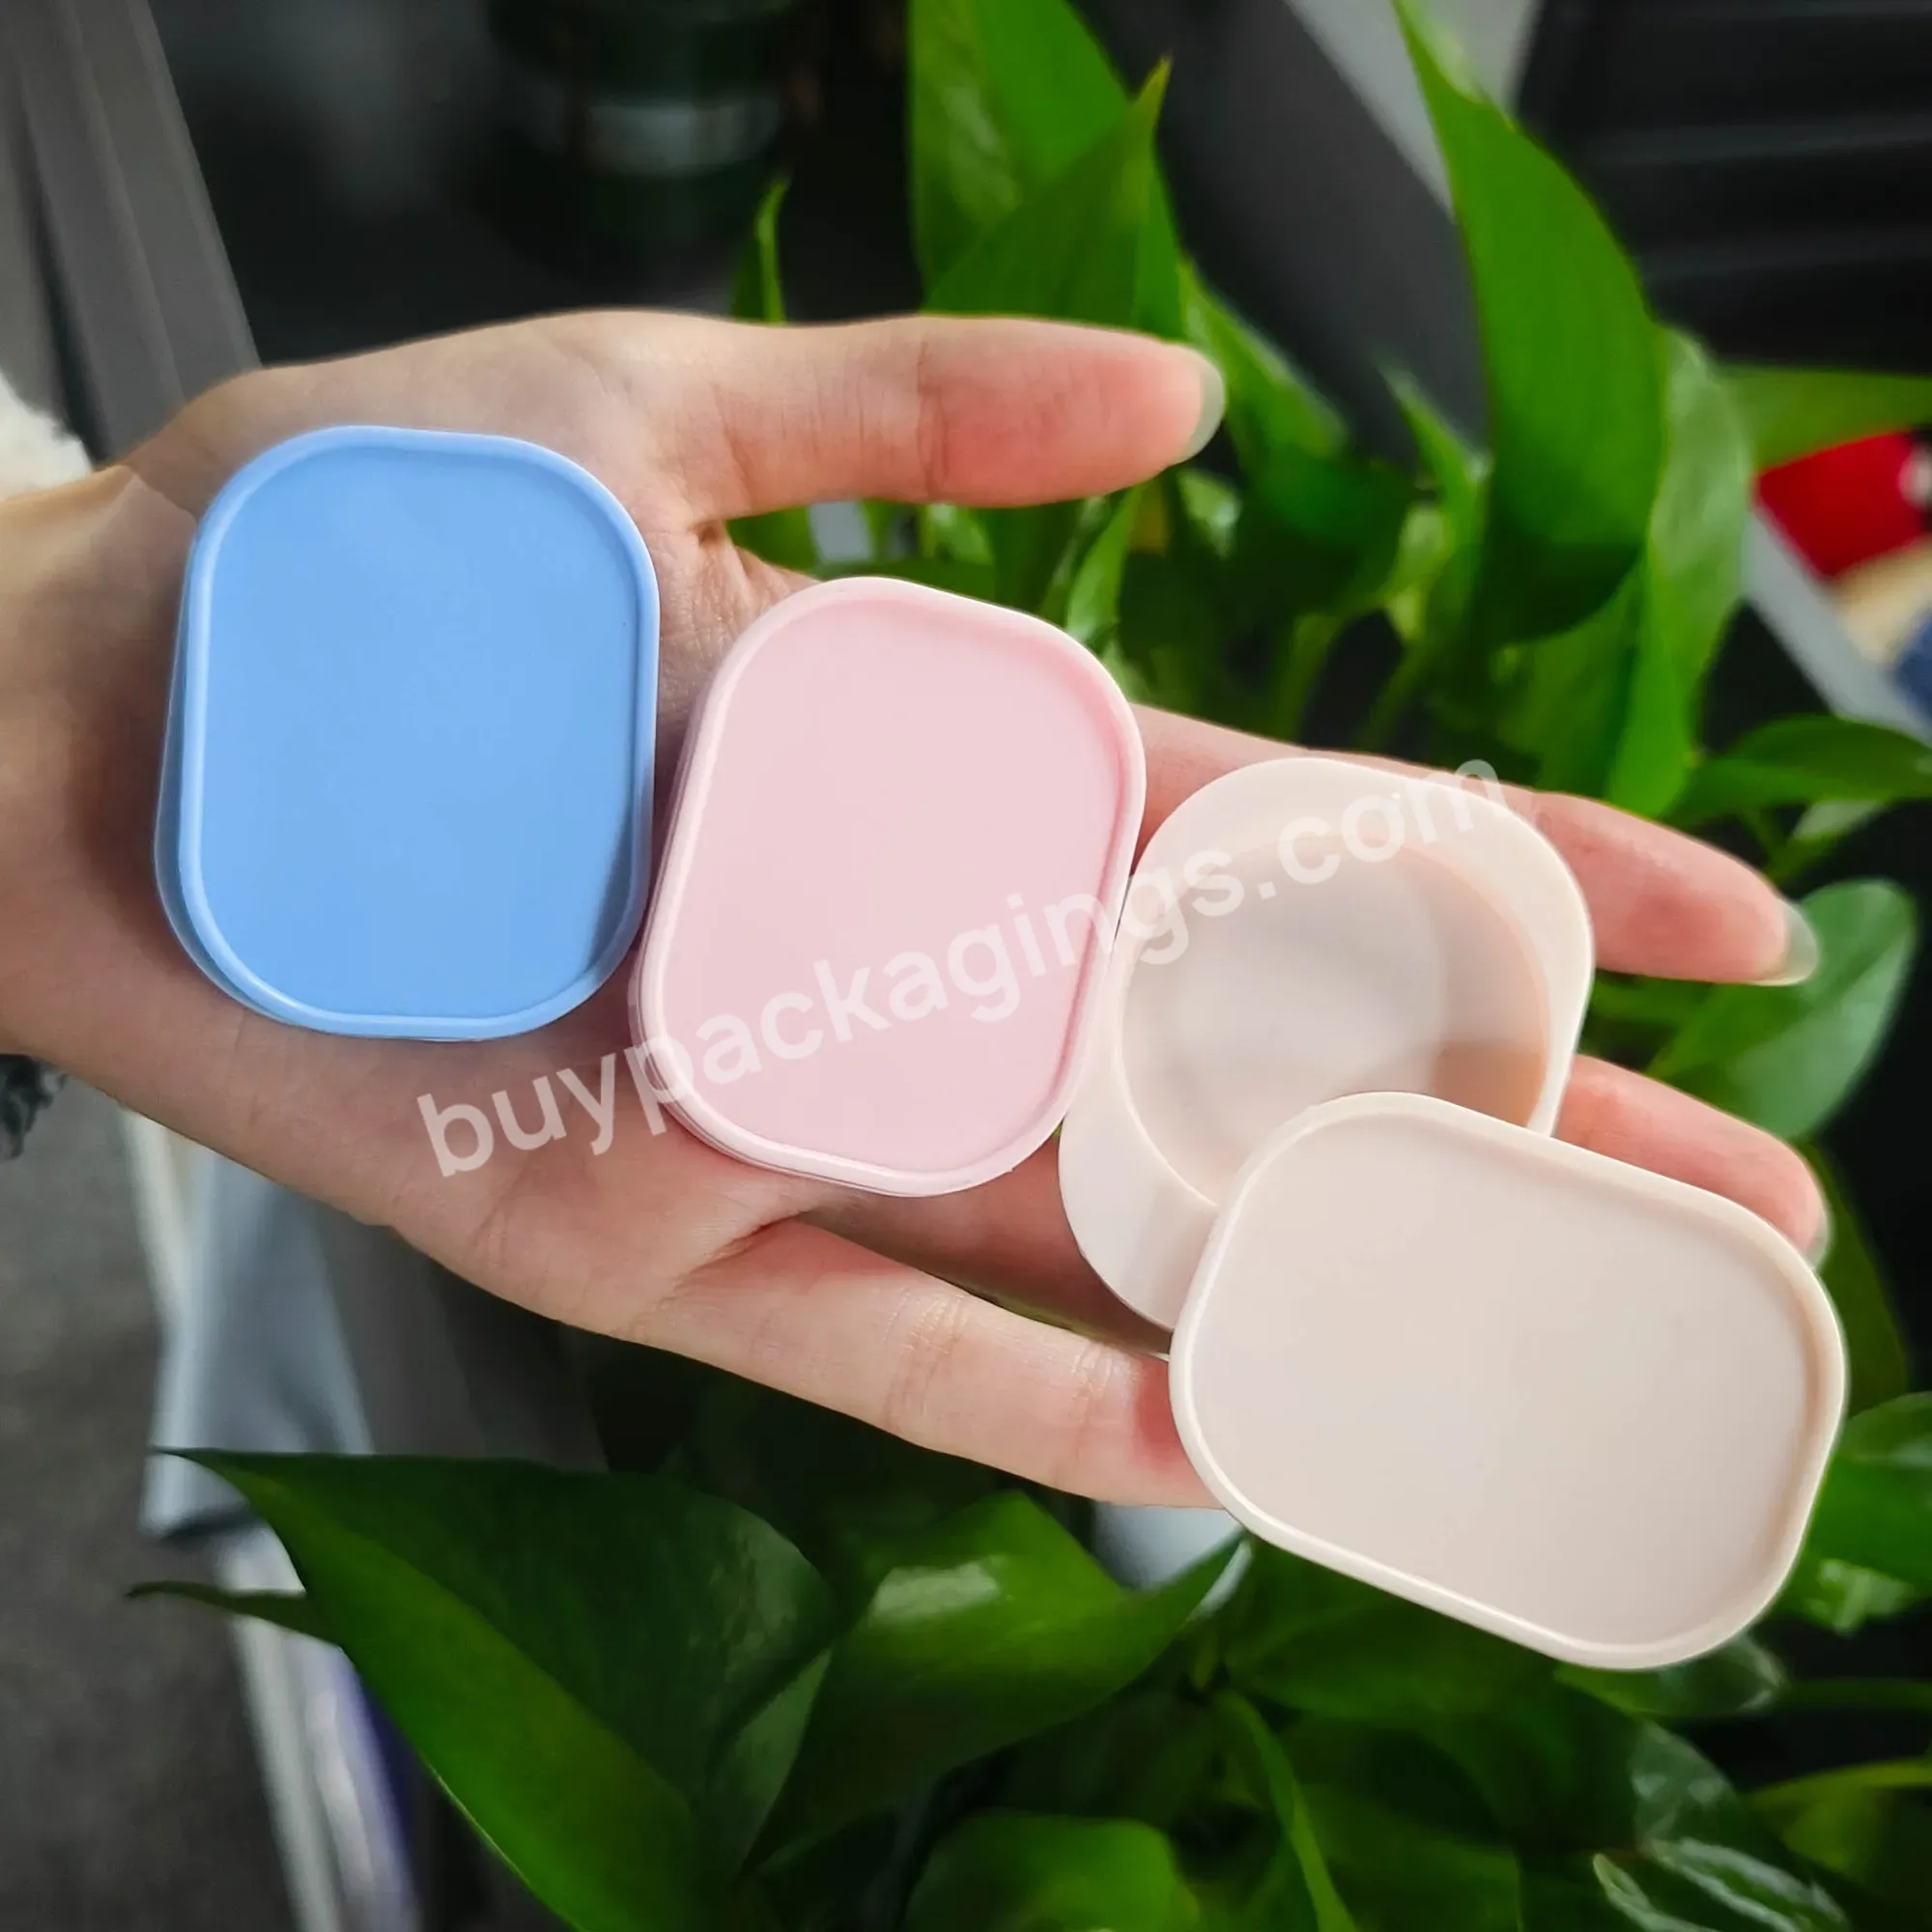 New Design Unique Cosmetic Makeup Packaging Plastic Powder Compact Case With Rotated Closure - Buy Single Clear Makeup Empty Transparent Heart Blush Blusher Container Heart Shaped Pan Mini Compact Powder Case,Heart Shape Powder Compact Case Empty Cut